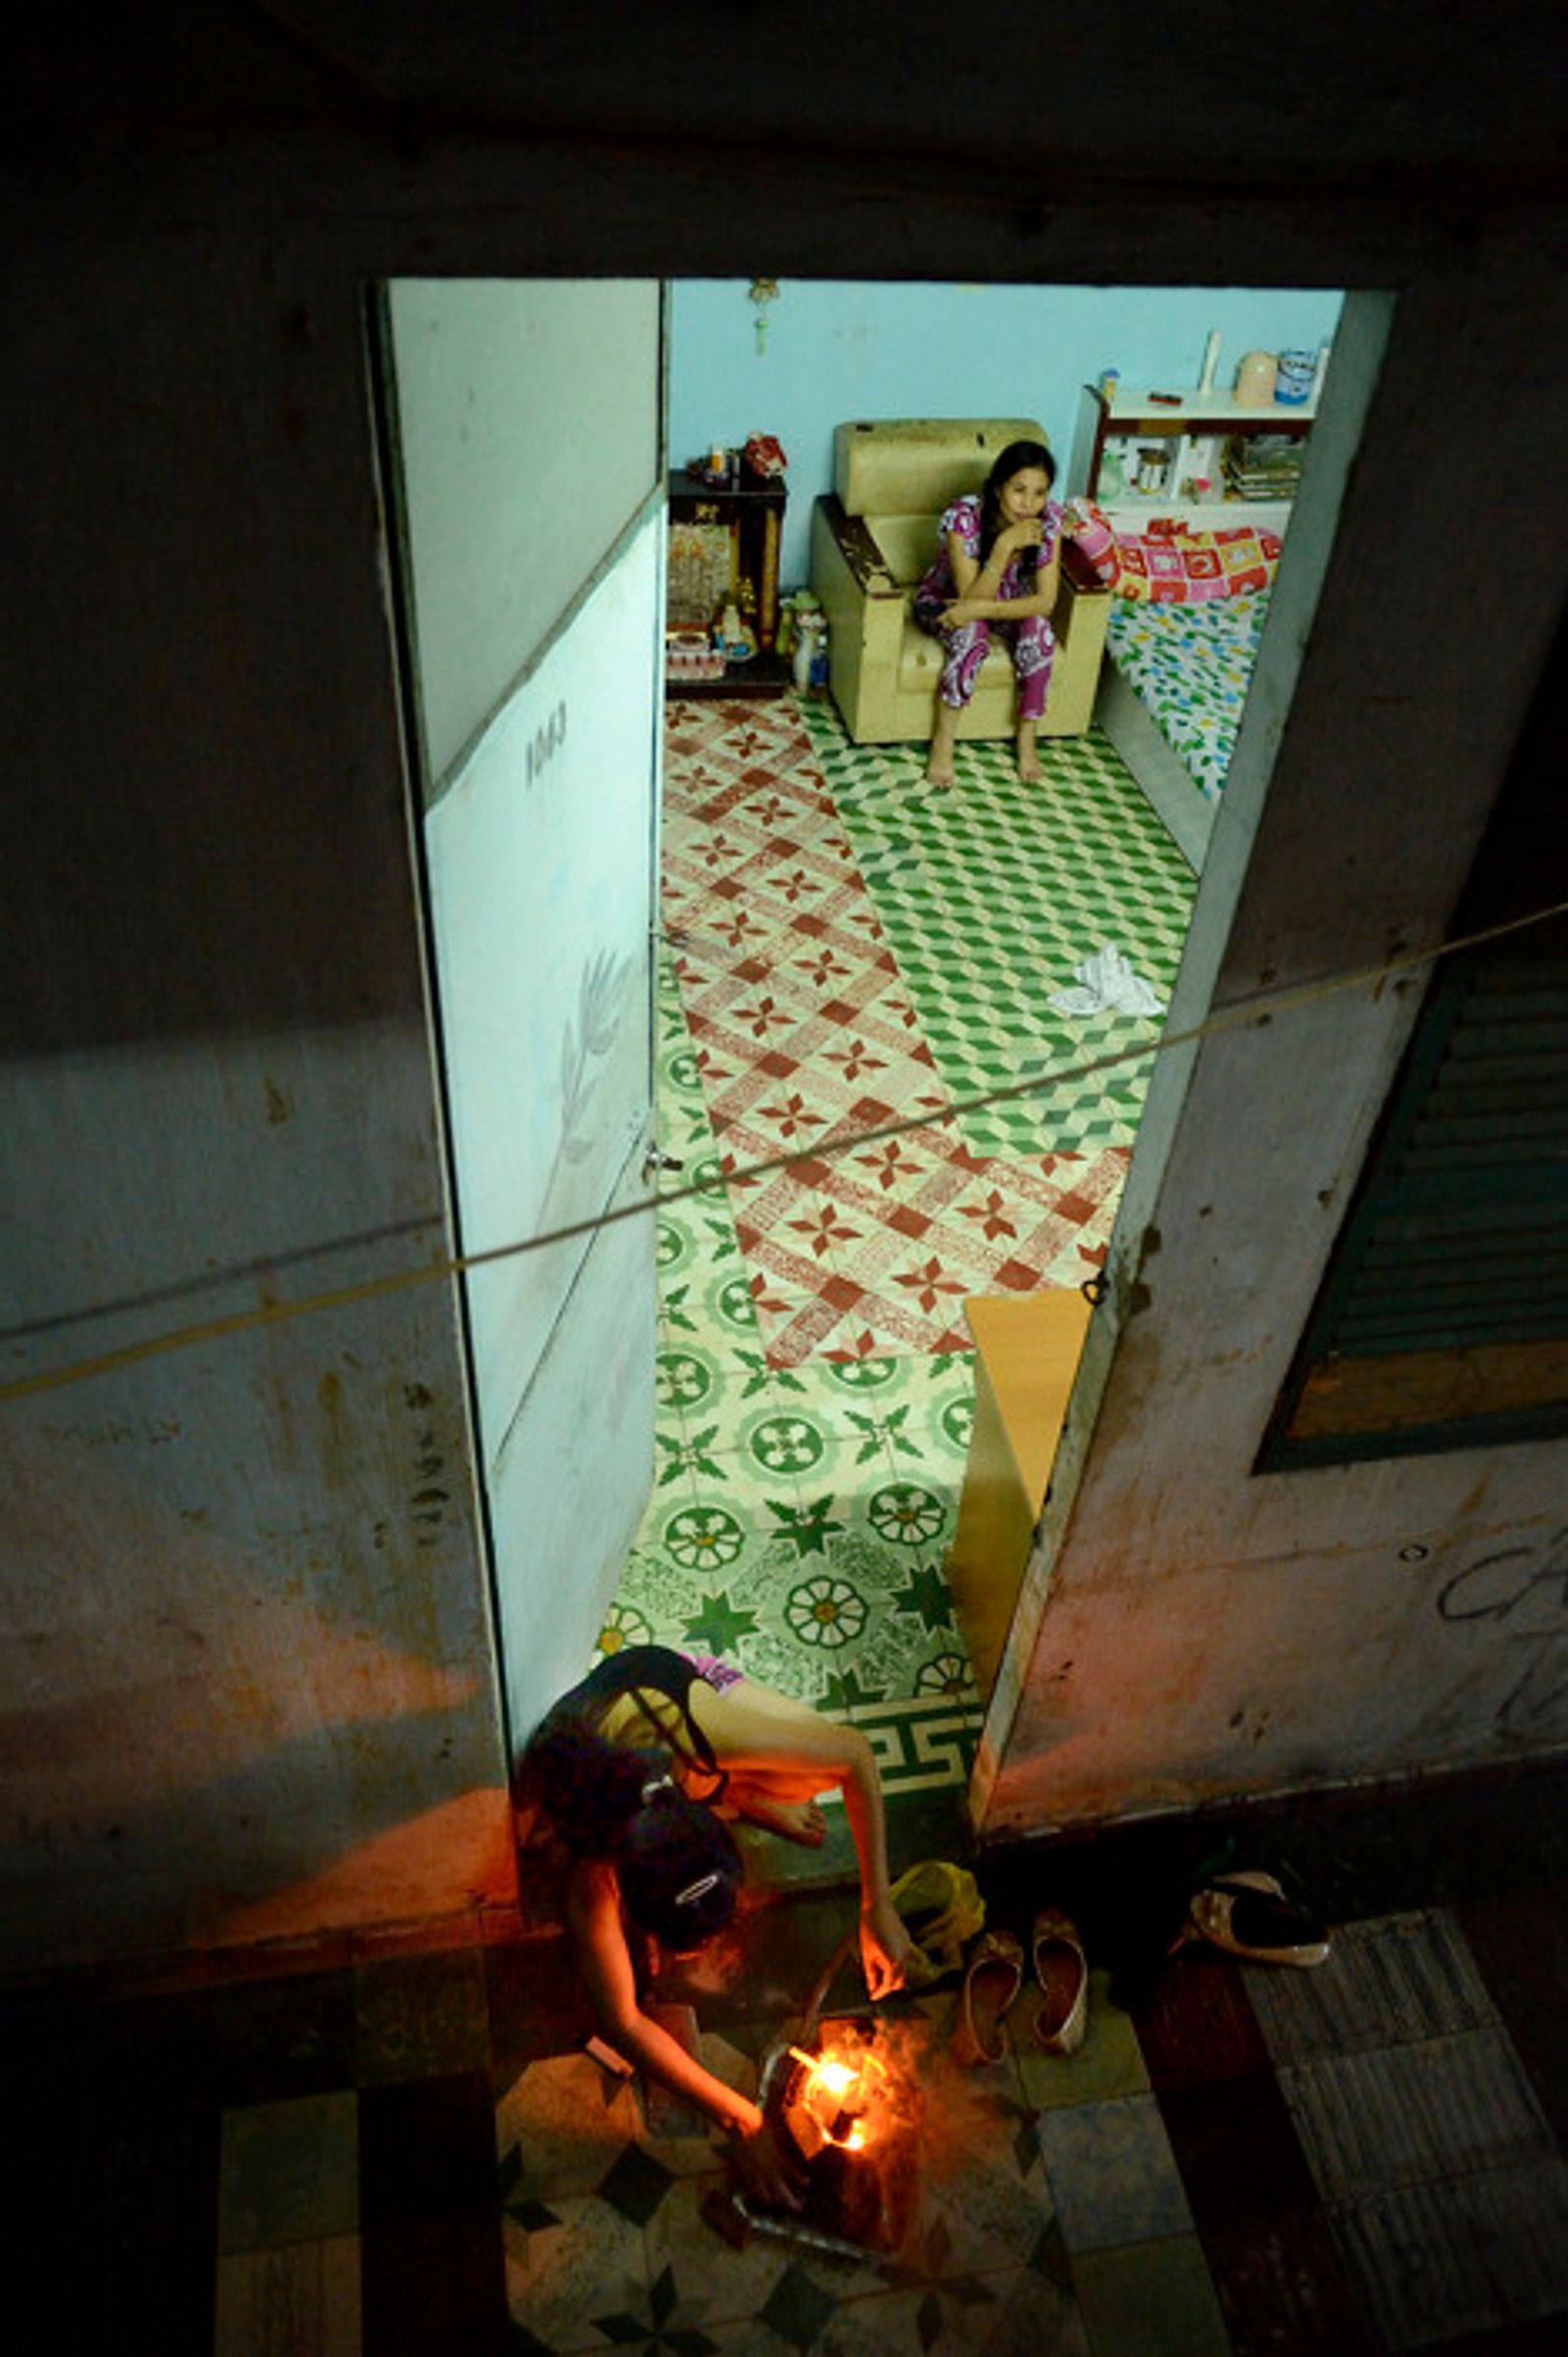 © Laurent Weyl - Image from the President Hotel - Ho Chi Minh City - Vietnam photography project